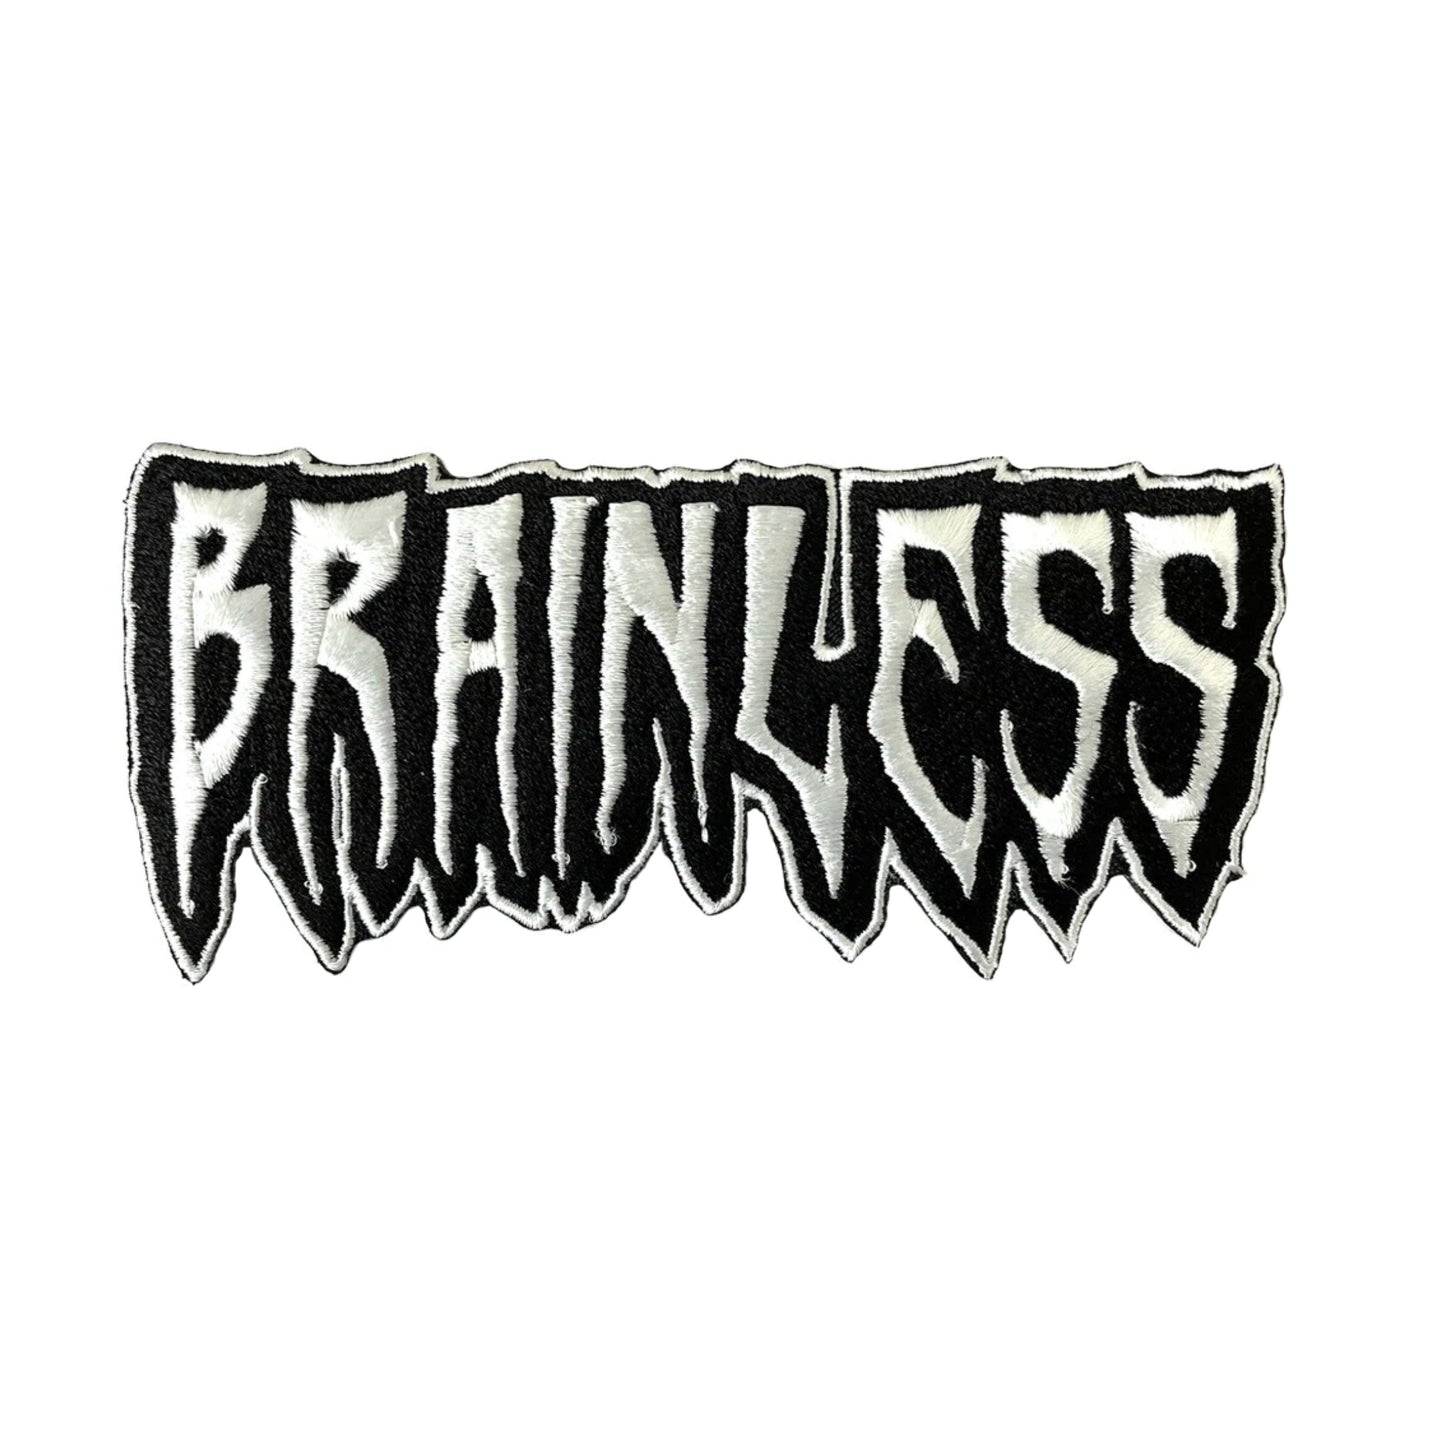 Brainless skateboards Name patch